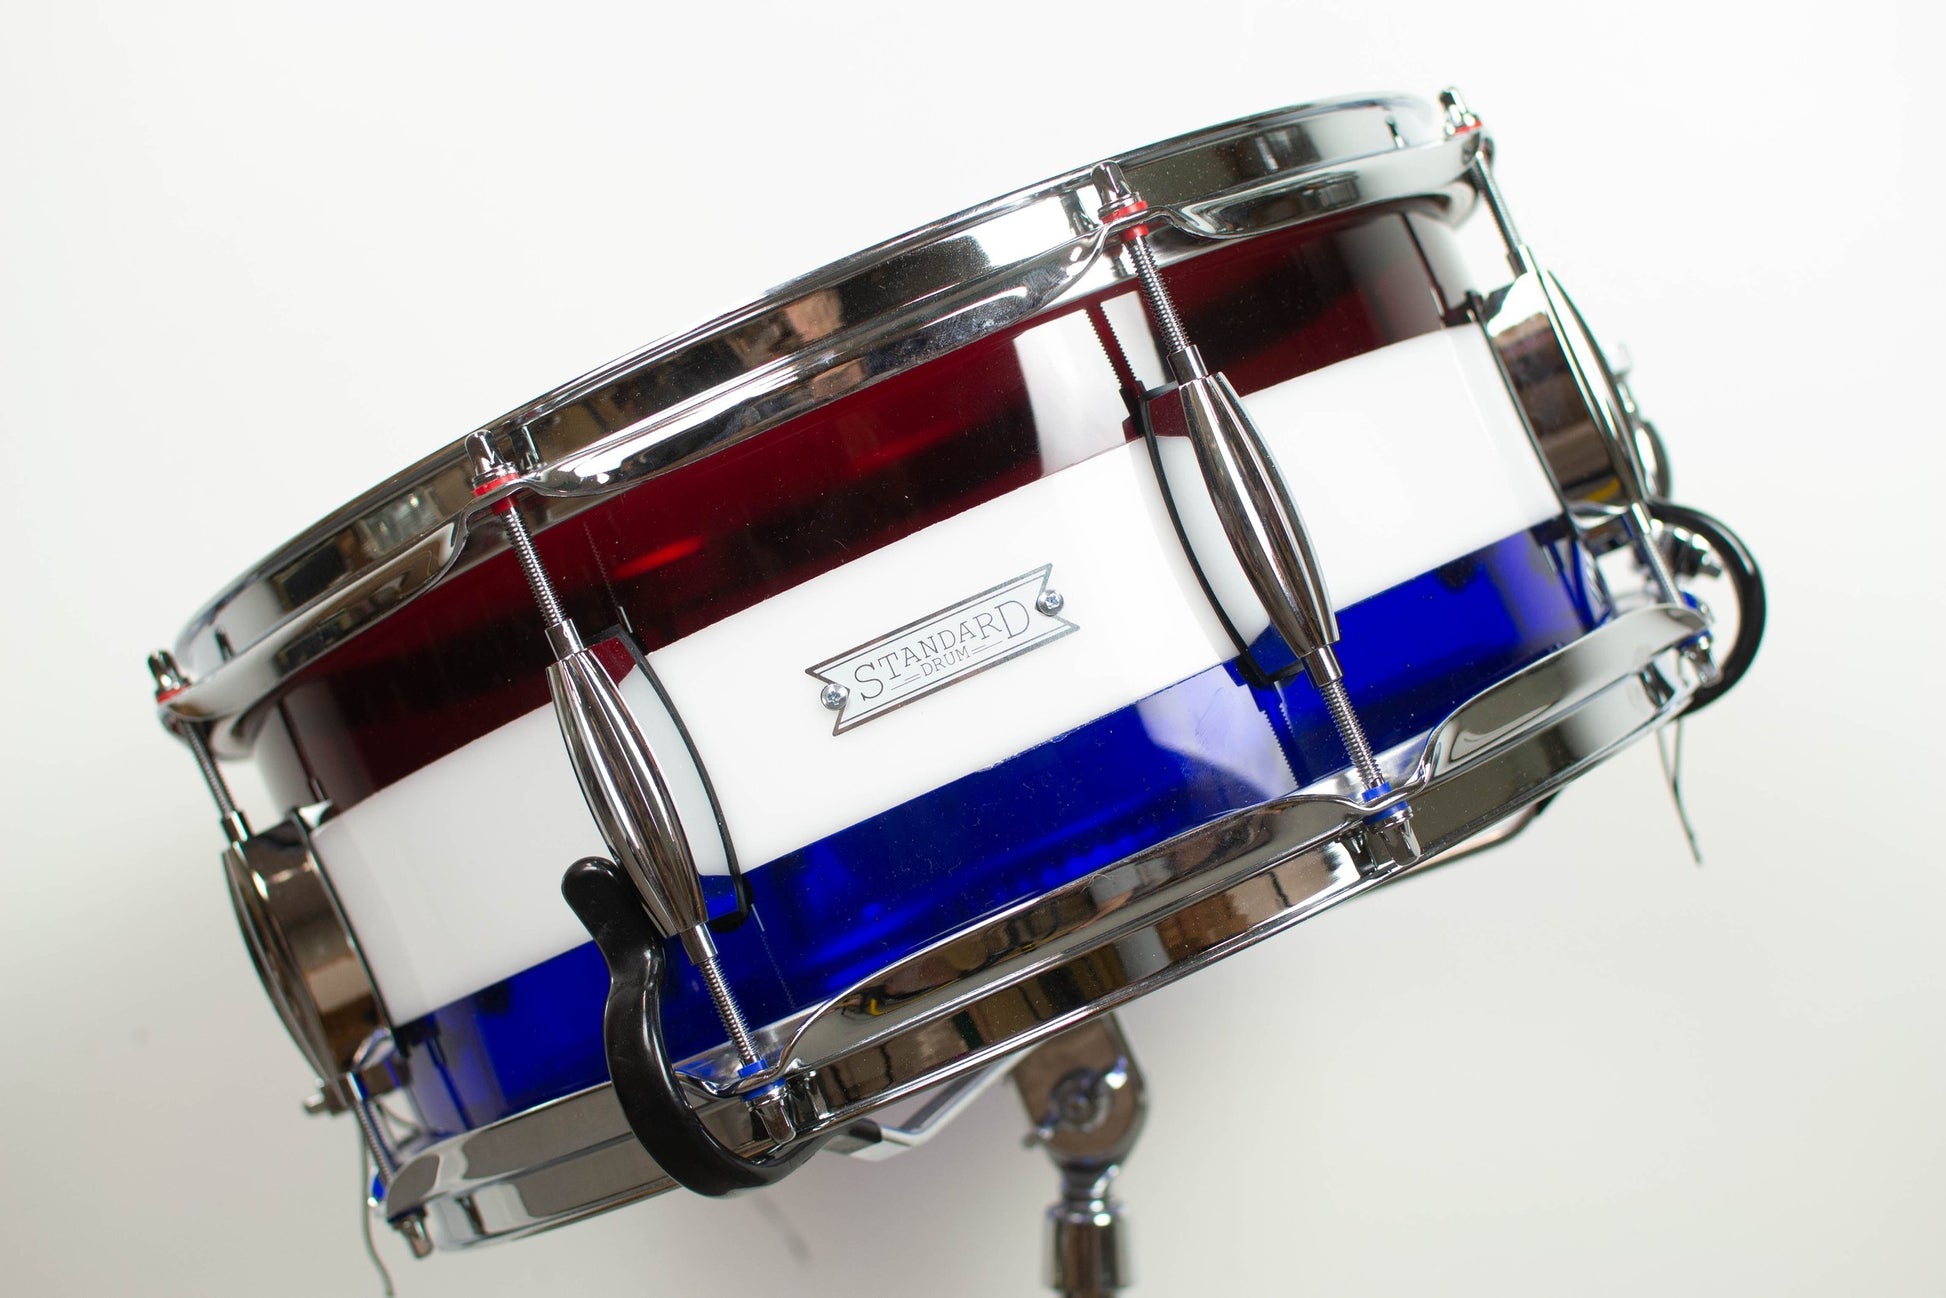 Standard Drum 6X14 Red White and Blue Acrylic Snare Drum